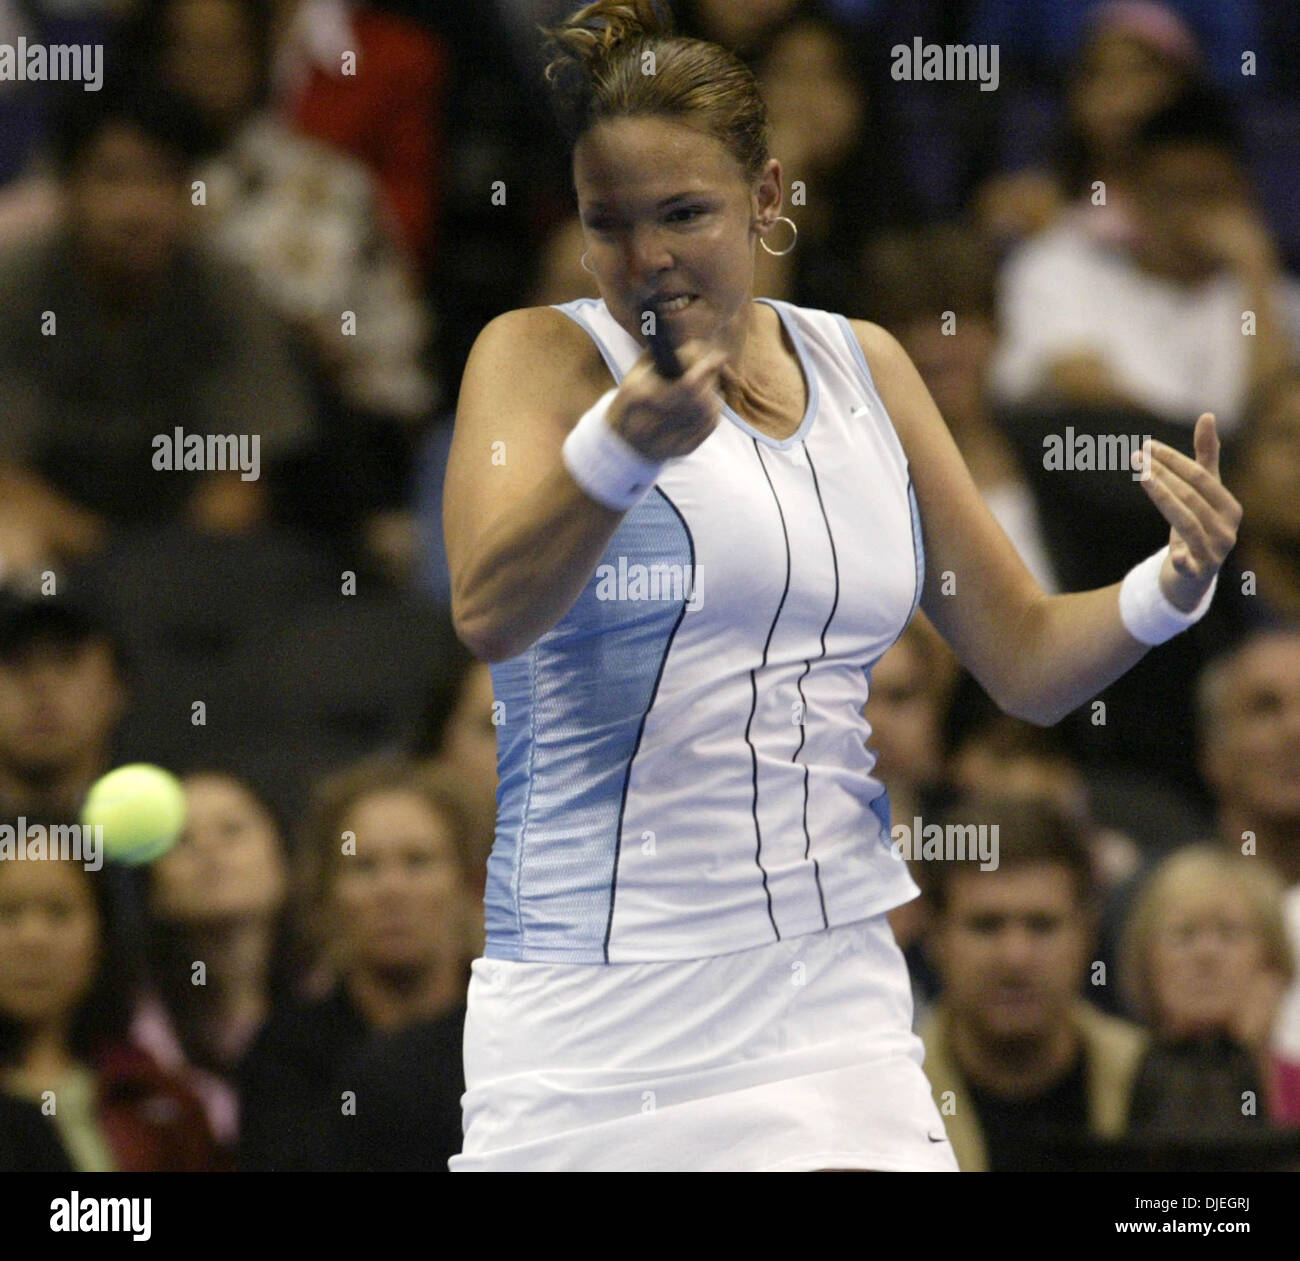 Nov 11, 2004; Los Angeles, CA, USA;  LINDSAY DAVENPORT of the USA hits a return ball to Serena Williams of the USA  during the 2004 WTA Tour Championships Saturday 13 November 2004 at the Staples Center in Los Angeles, California. Stock Photo